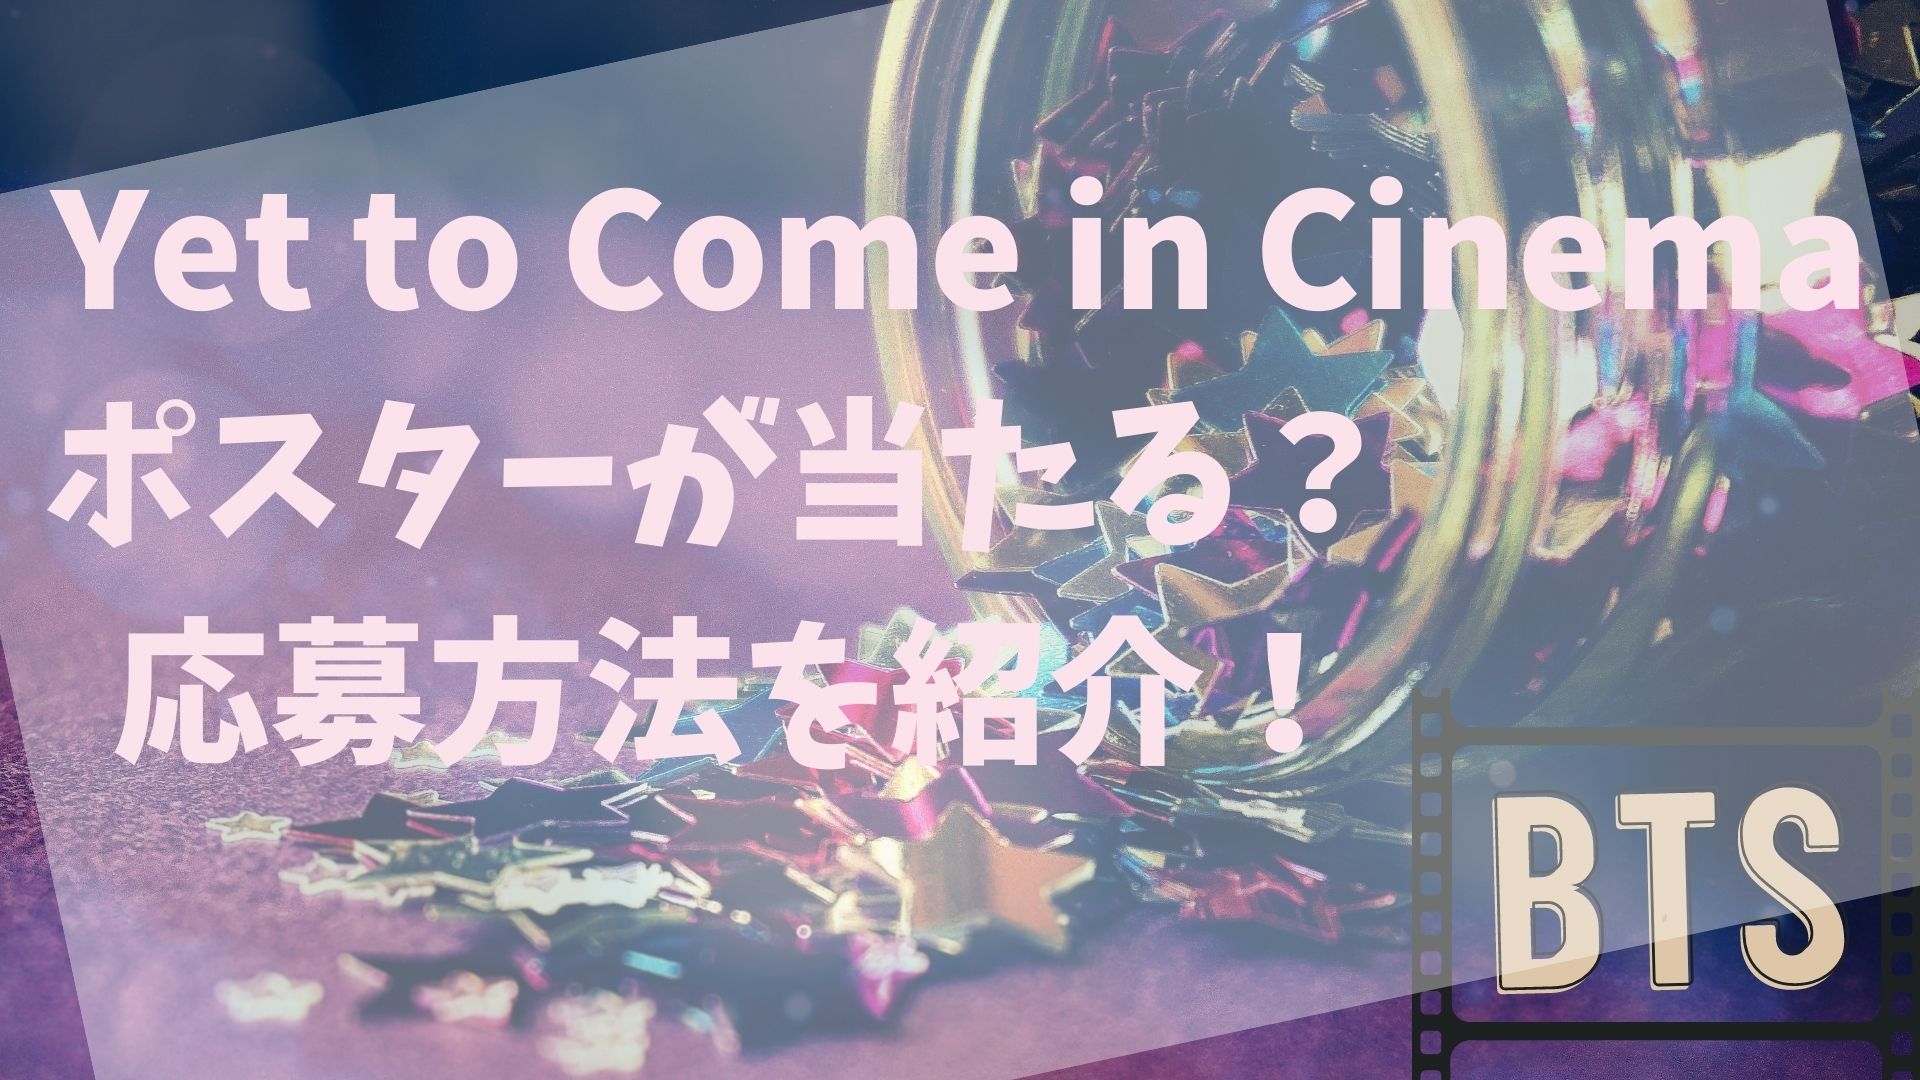 【BTS Yet to Come in Cinema】ポスターが当たる？応募方法を紹介